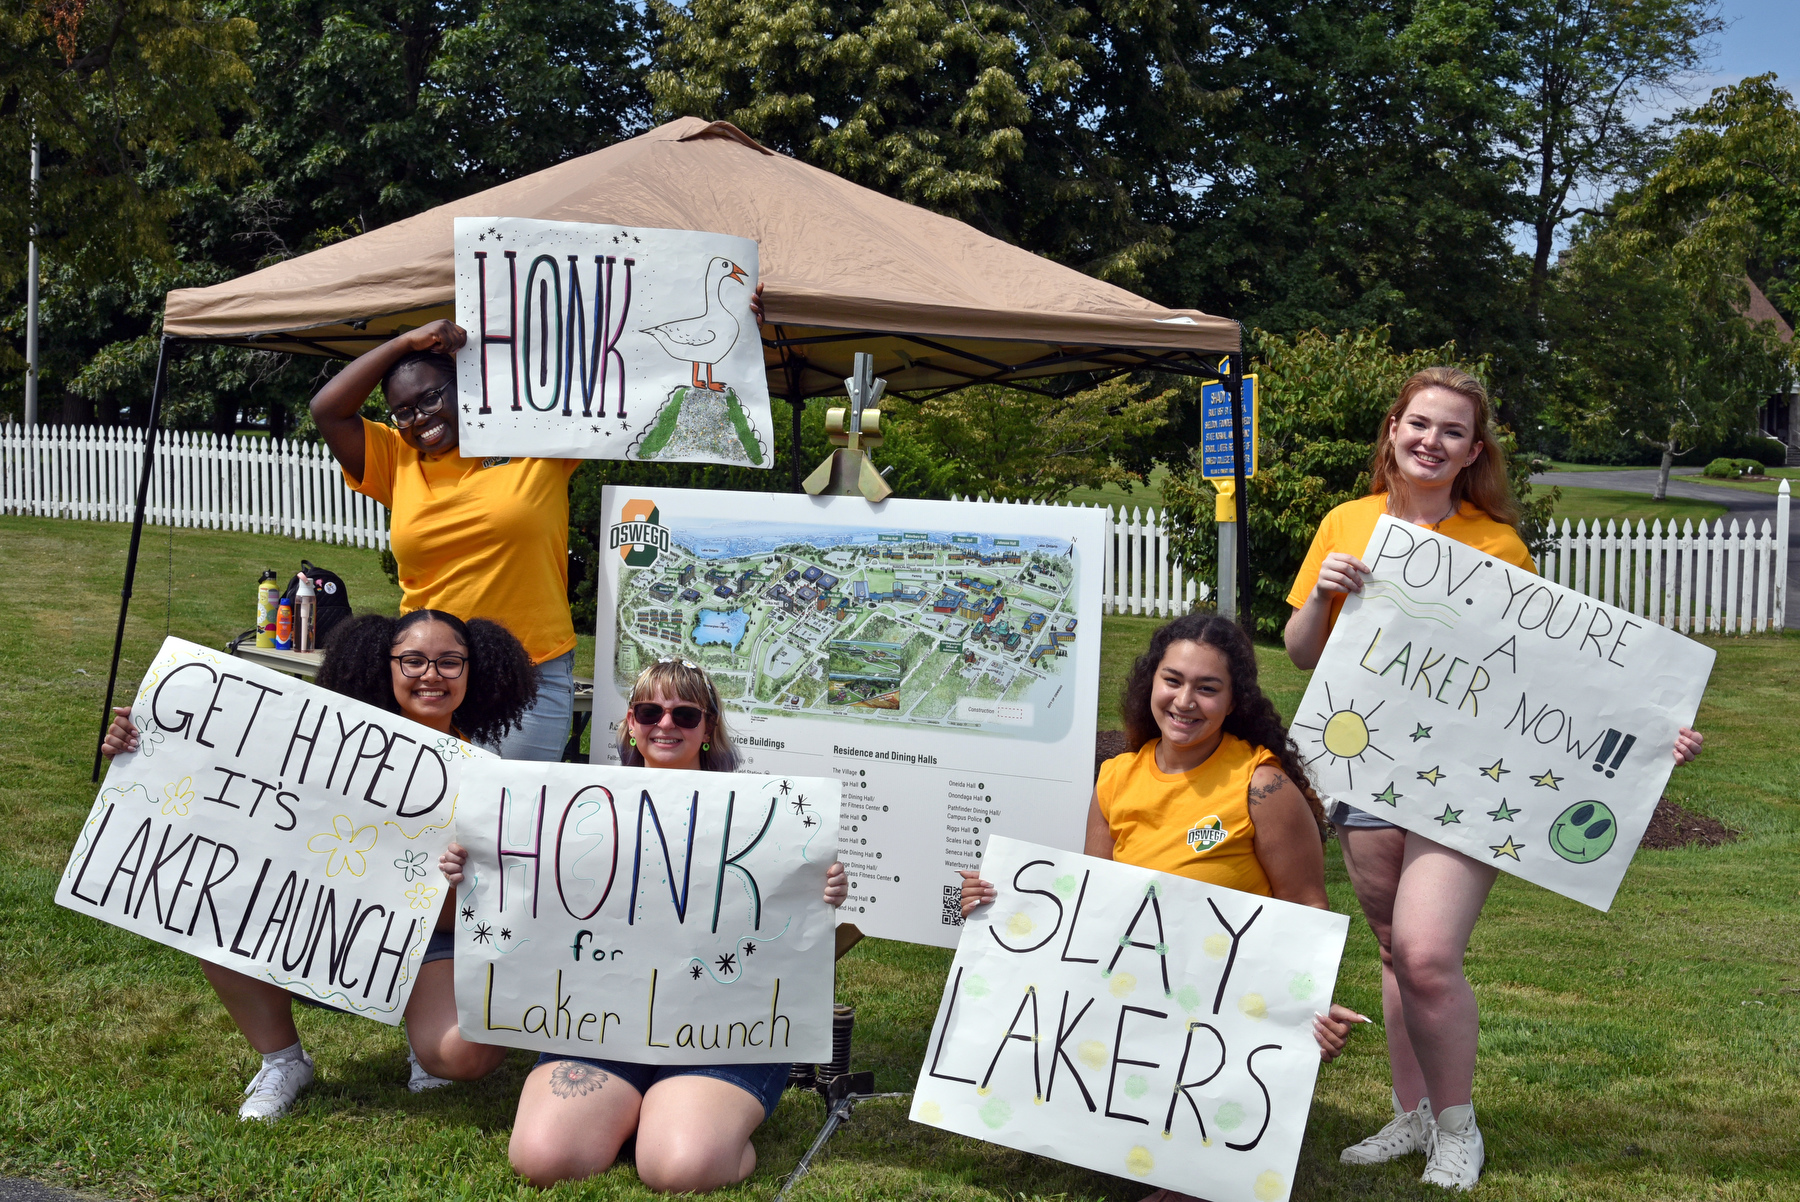 Teams of student volunteers were on hand to help with move-in week, directing incoming traffic to specific residence halls. One such group pictured at their station just outside Shady Shore greeted first-year stduents on their way to Johnson Hall and other lakeside halls.